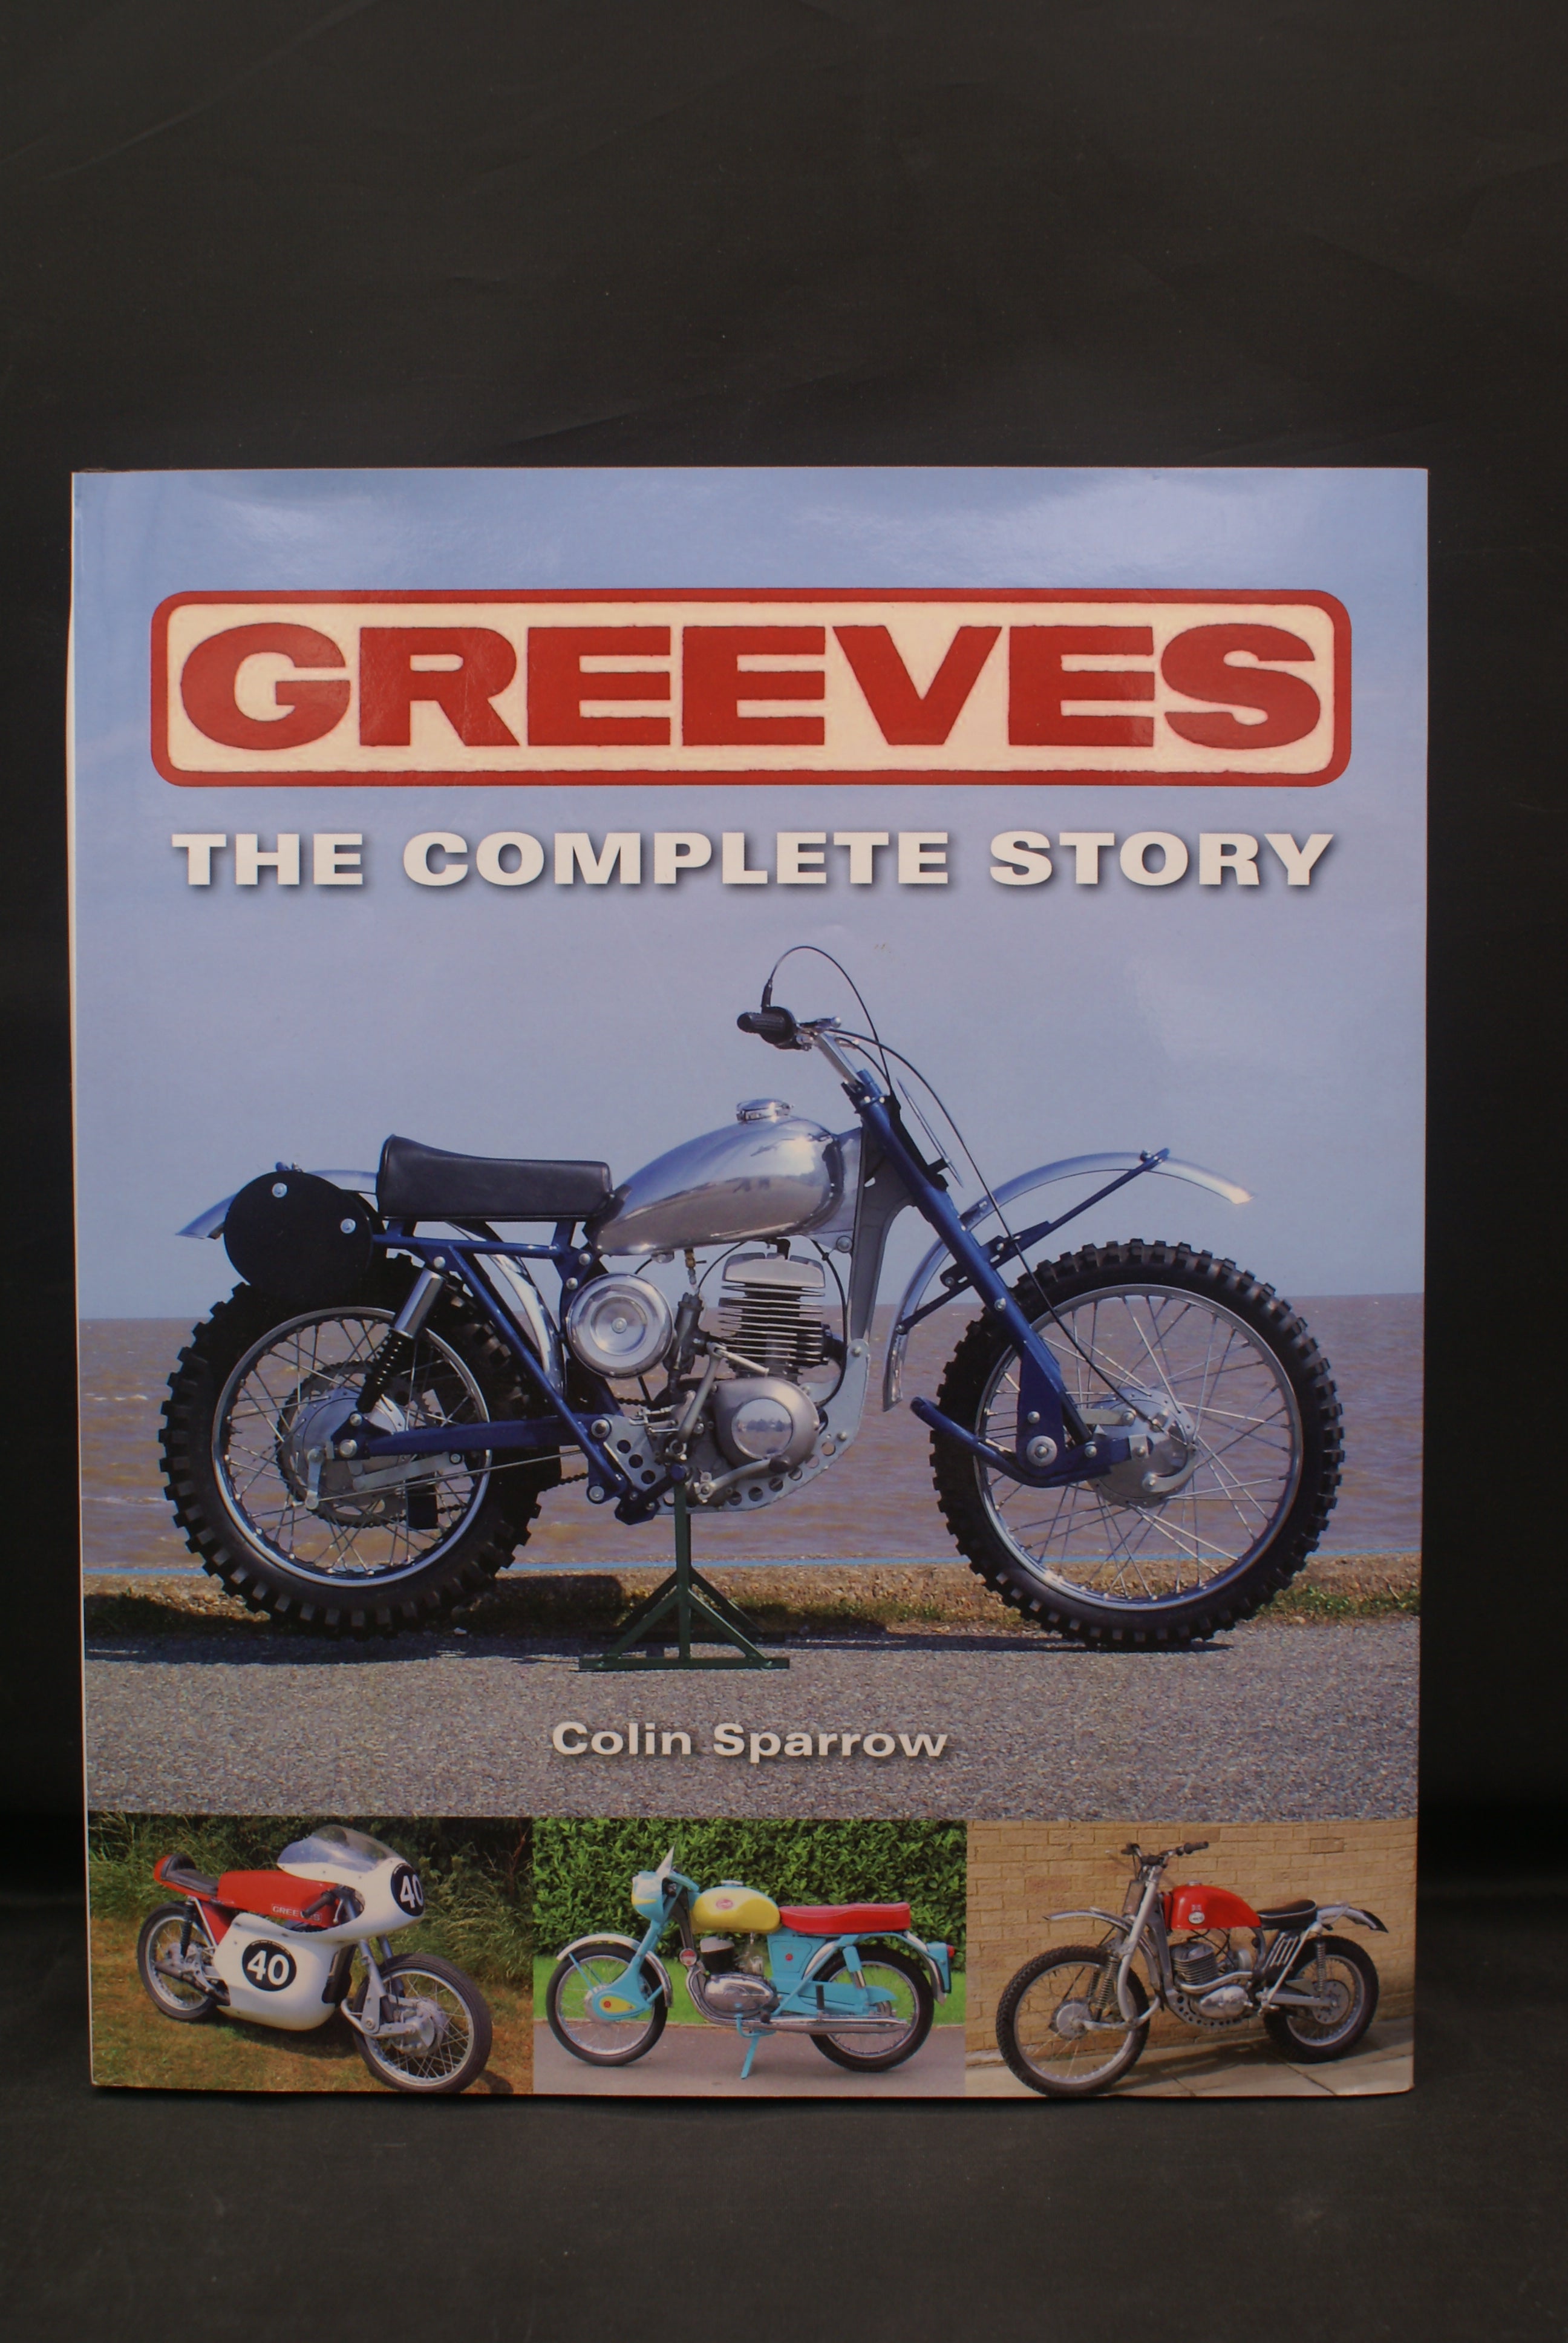 Greeves, The Complete Story